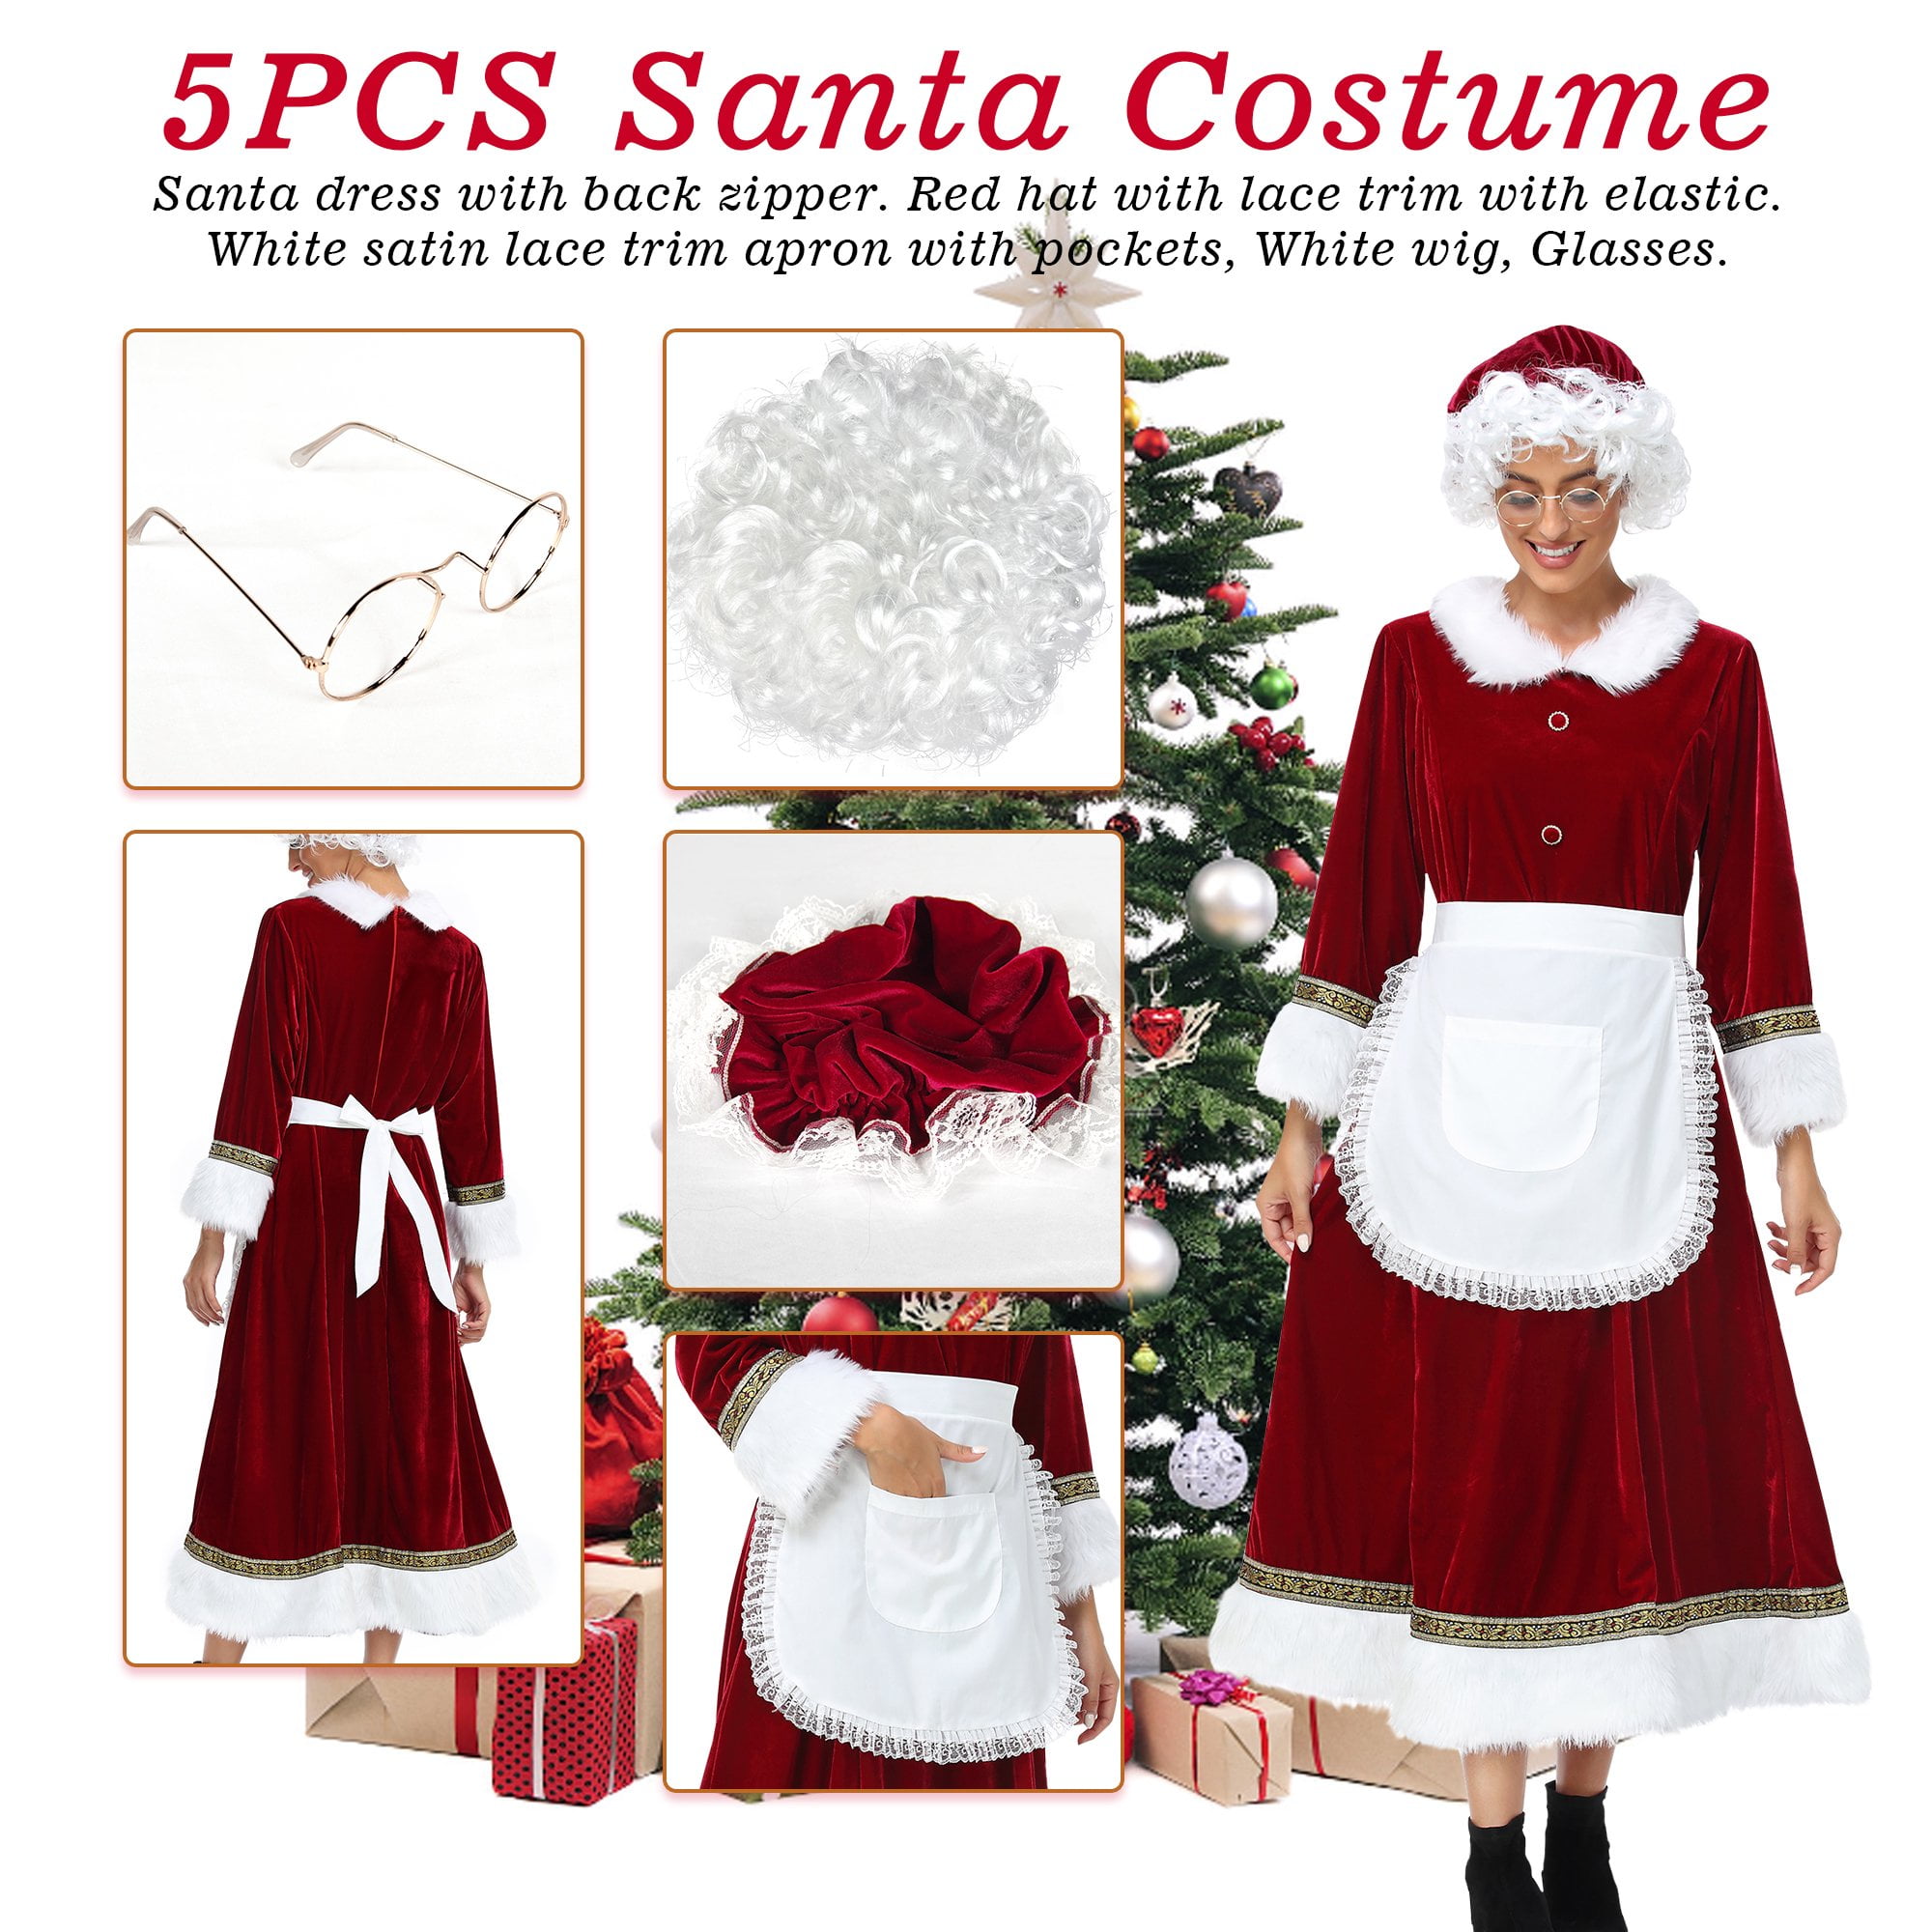 Mrs. Claus Costume for Women Adult Christmas Plus Size Dress with Bonnet Apron White Hair Wigs and Wire Rim Glasses -XL - Walmart.com